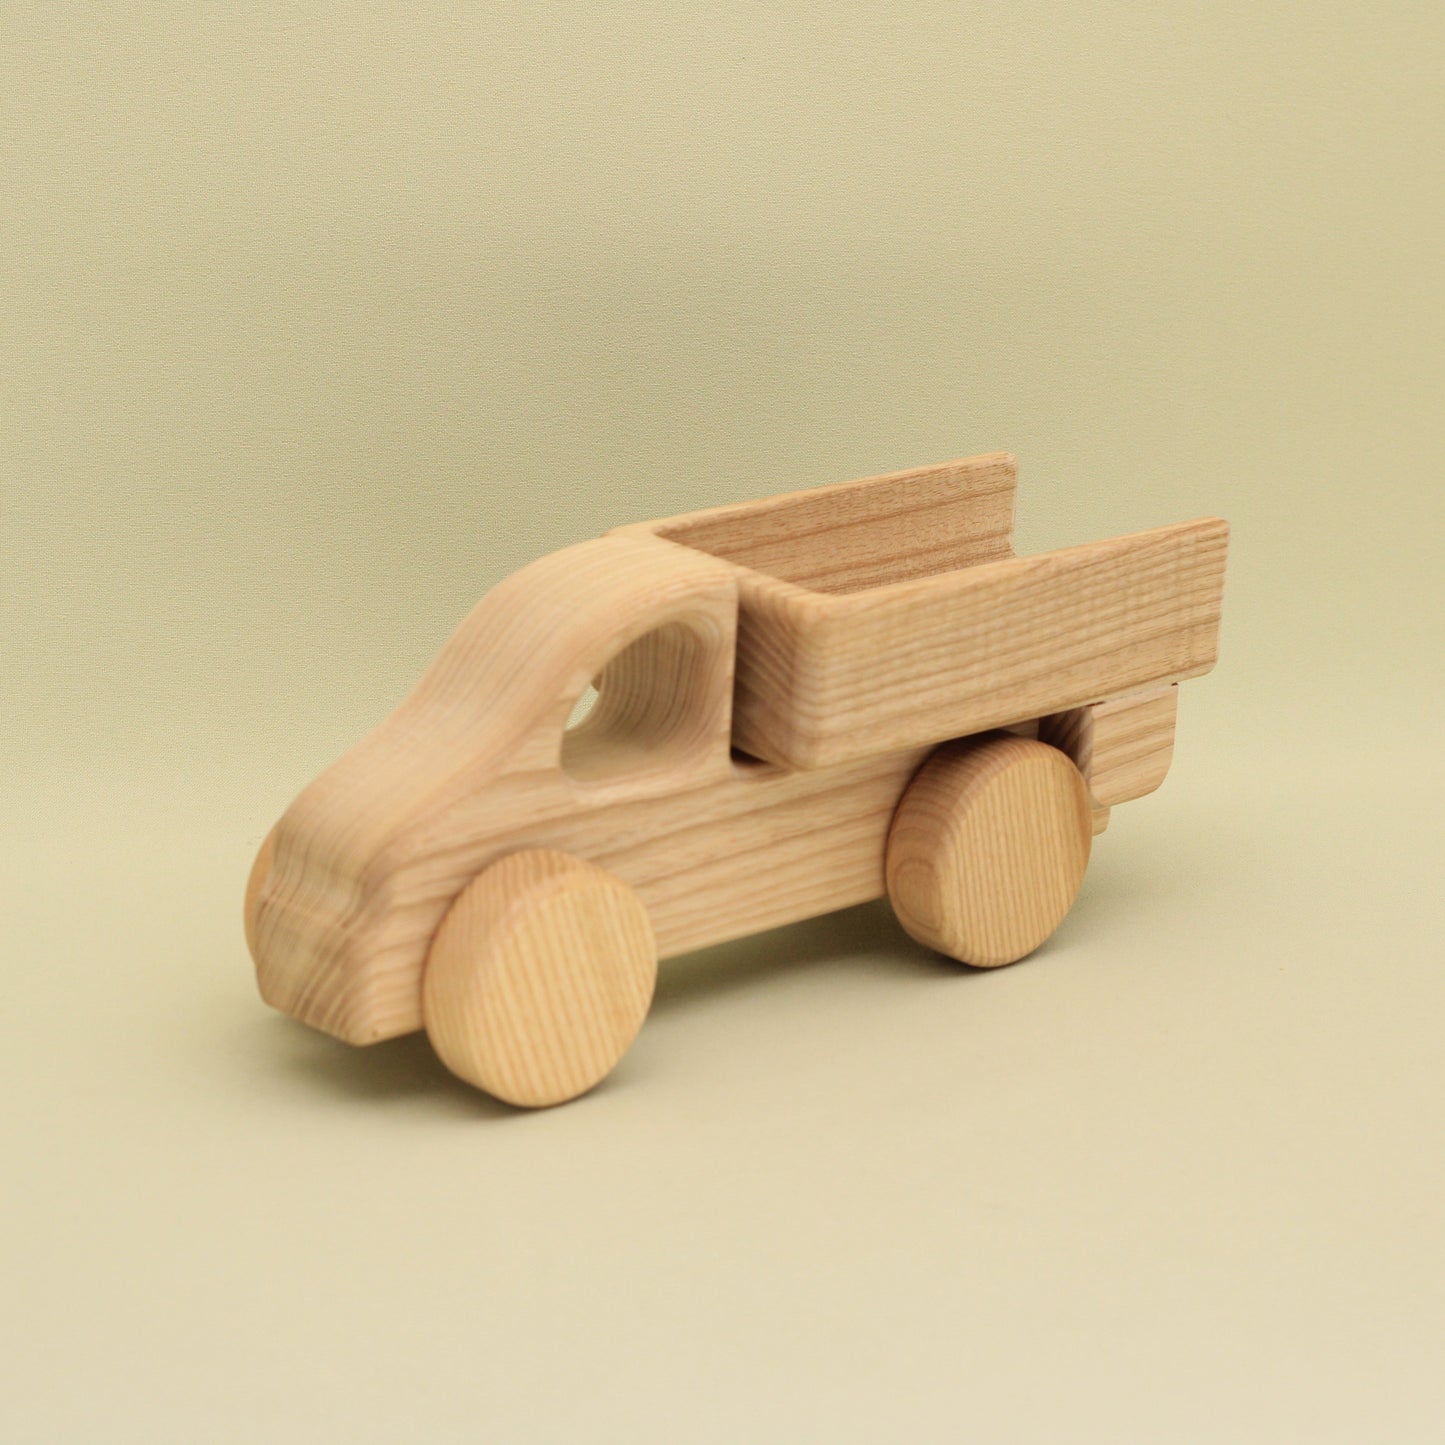 Lotes Toys Wooden Construction Vehicles Car BT11